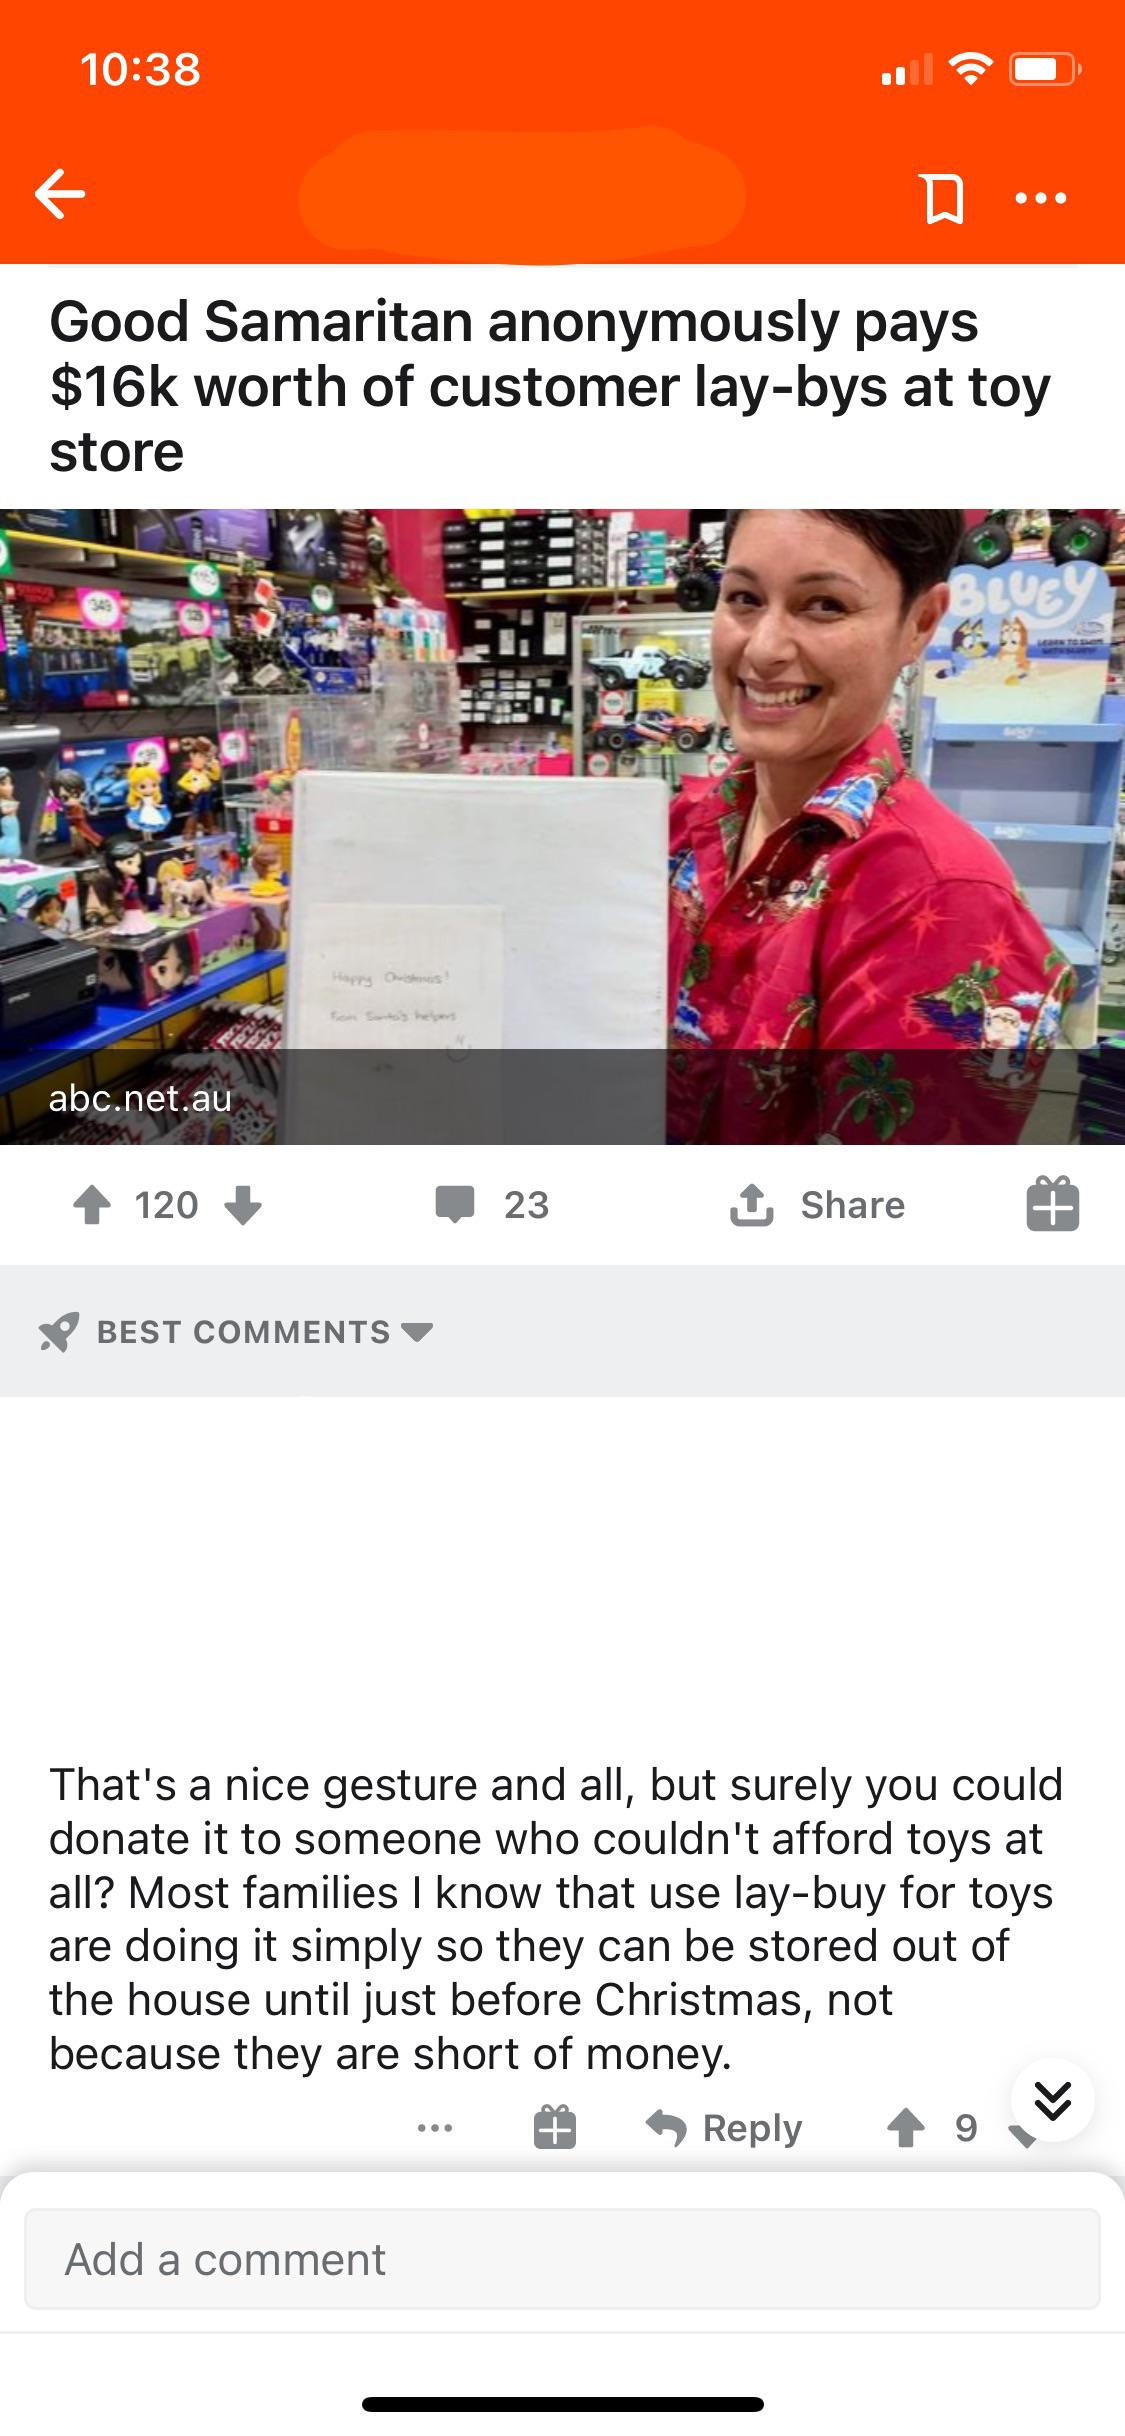 entitled people - web page - k Good Samaritan anonymously pays $16k worth of customer laybys at toy store Blue abc.net.au 120 23 1 Best That's a nice gesture and all, but surely you could donate it to someone who couldn't afford toys at all? Most families